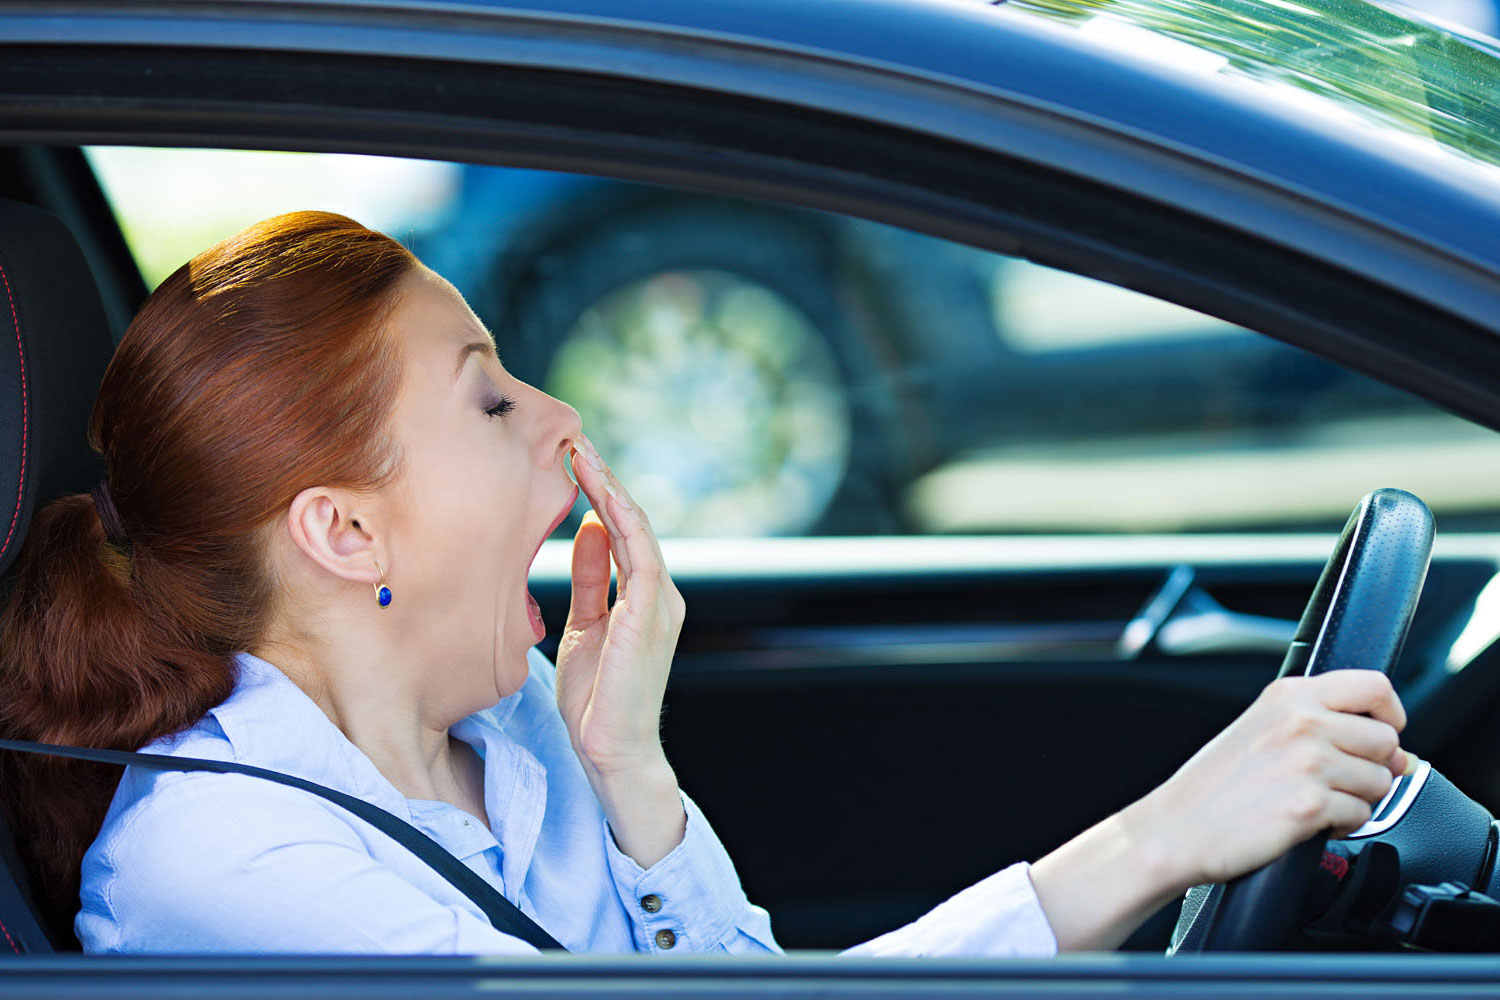 These signs indicate that you are about to get into a car accident